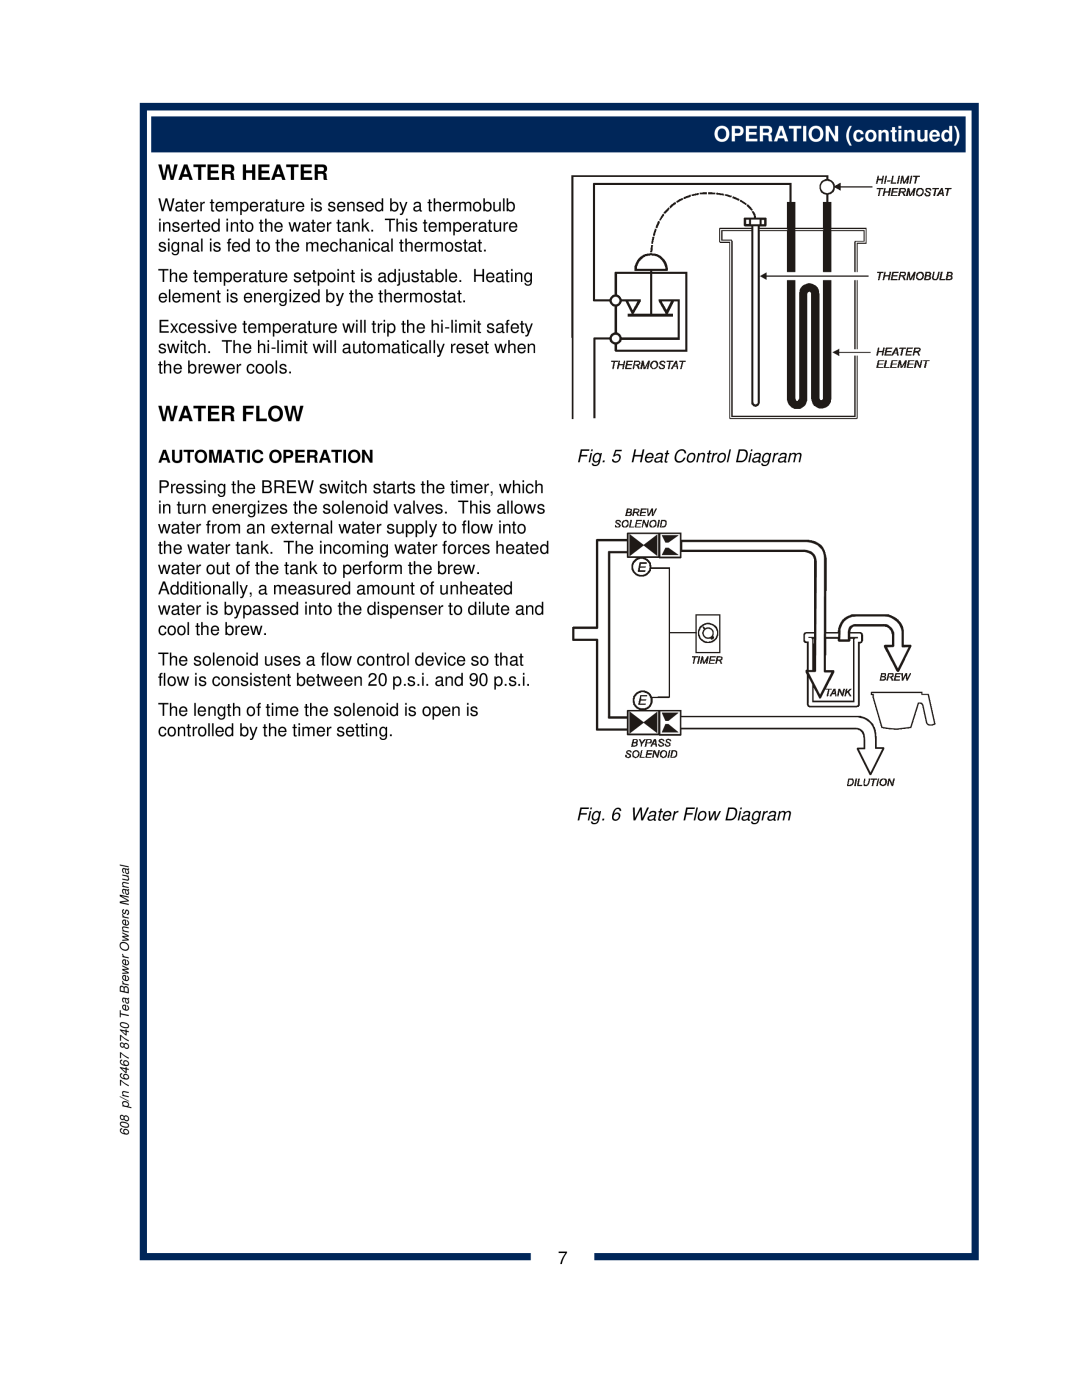 Bloomfield 8740 owner manual OPERATION continued, Water Heater, Water Flow, Automatic Operation, Heat Control Diagram 